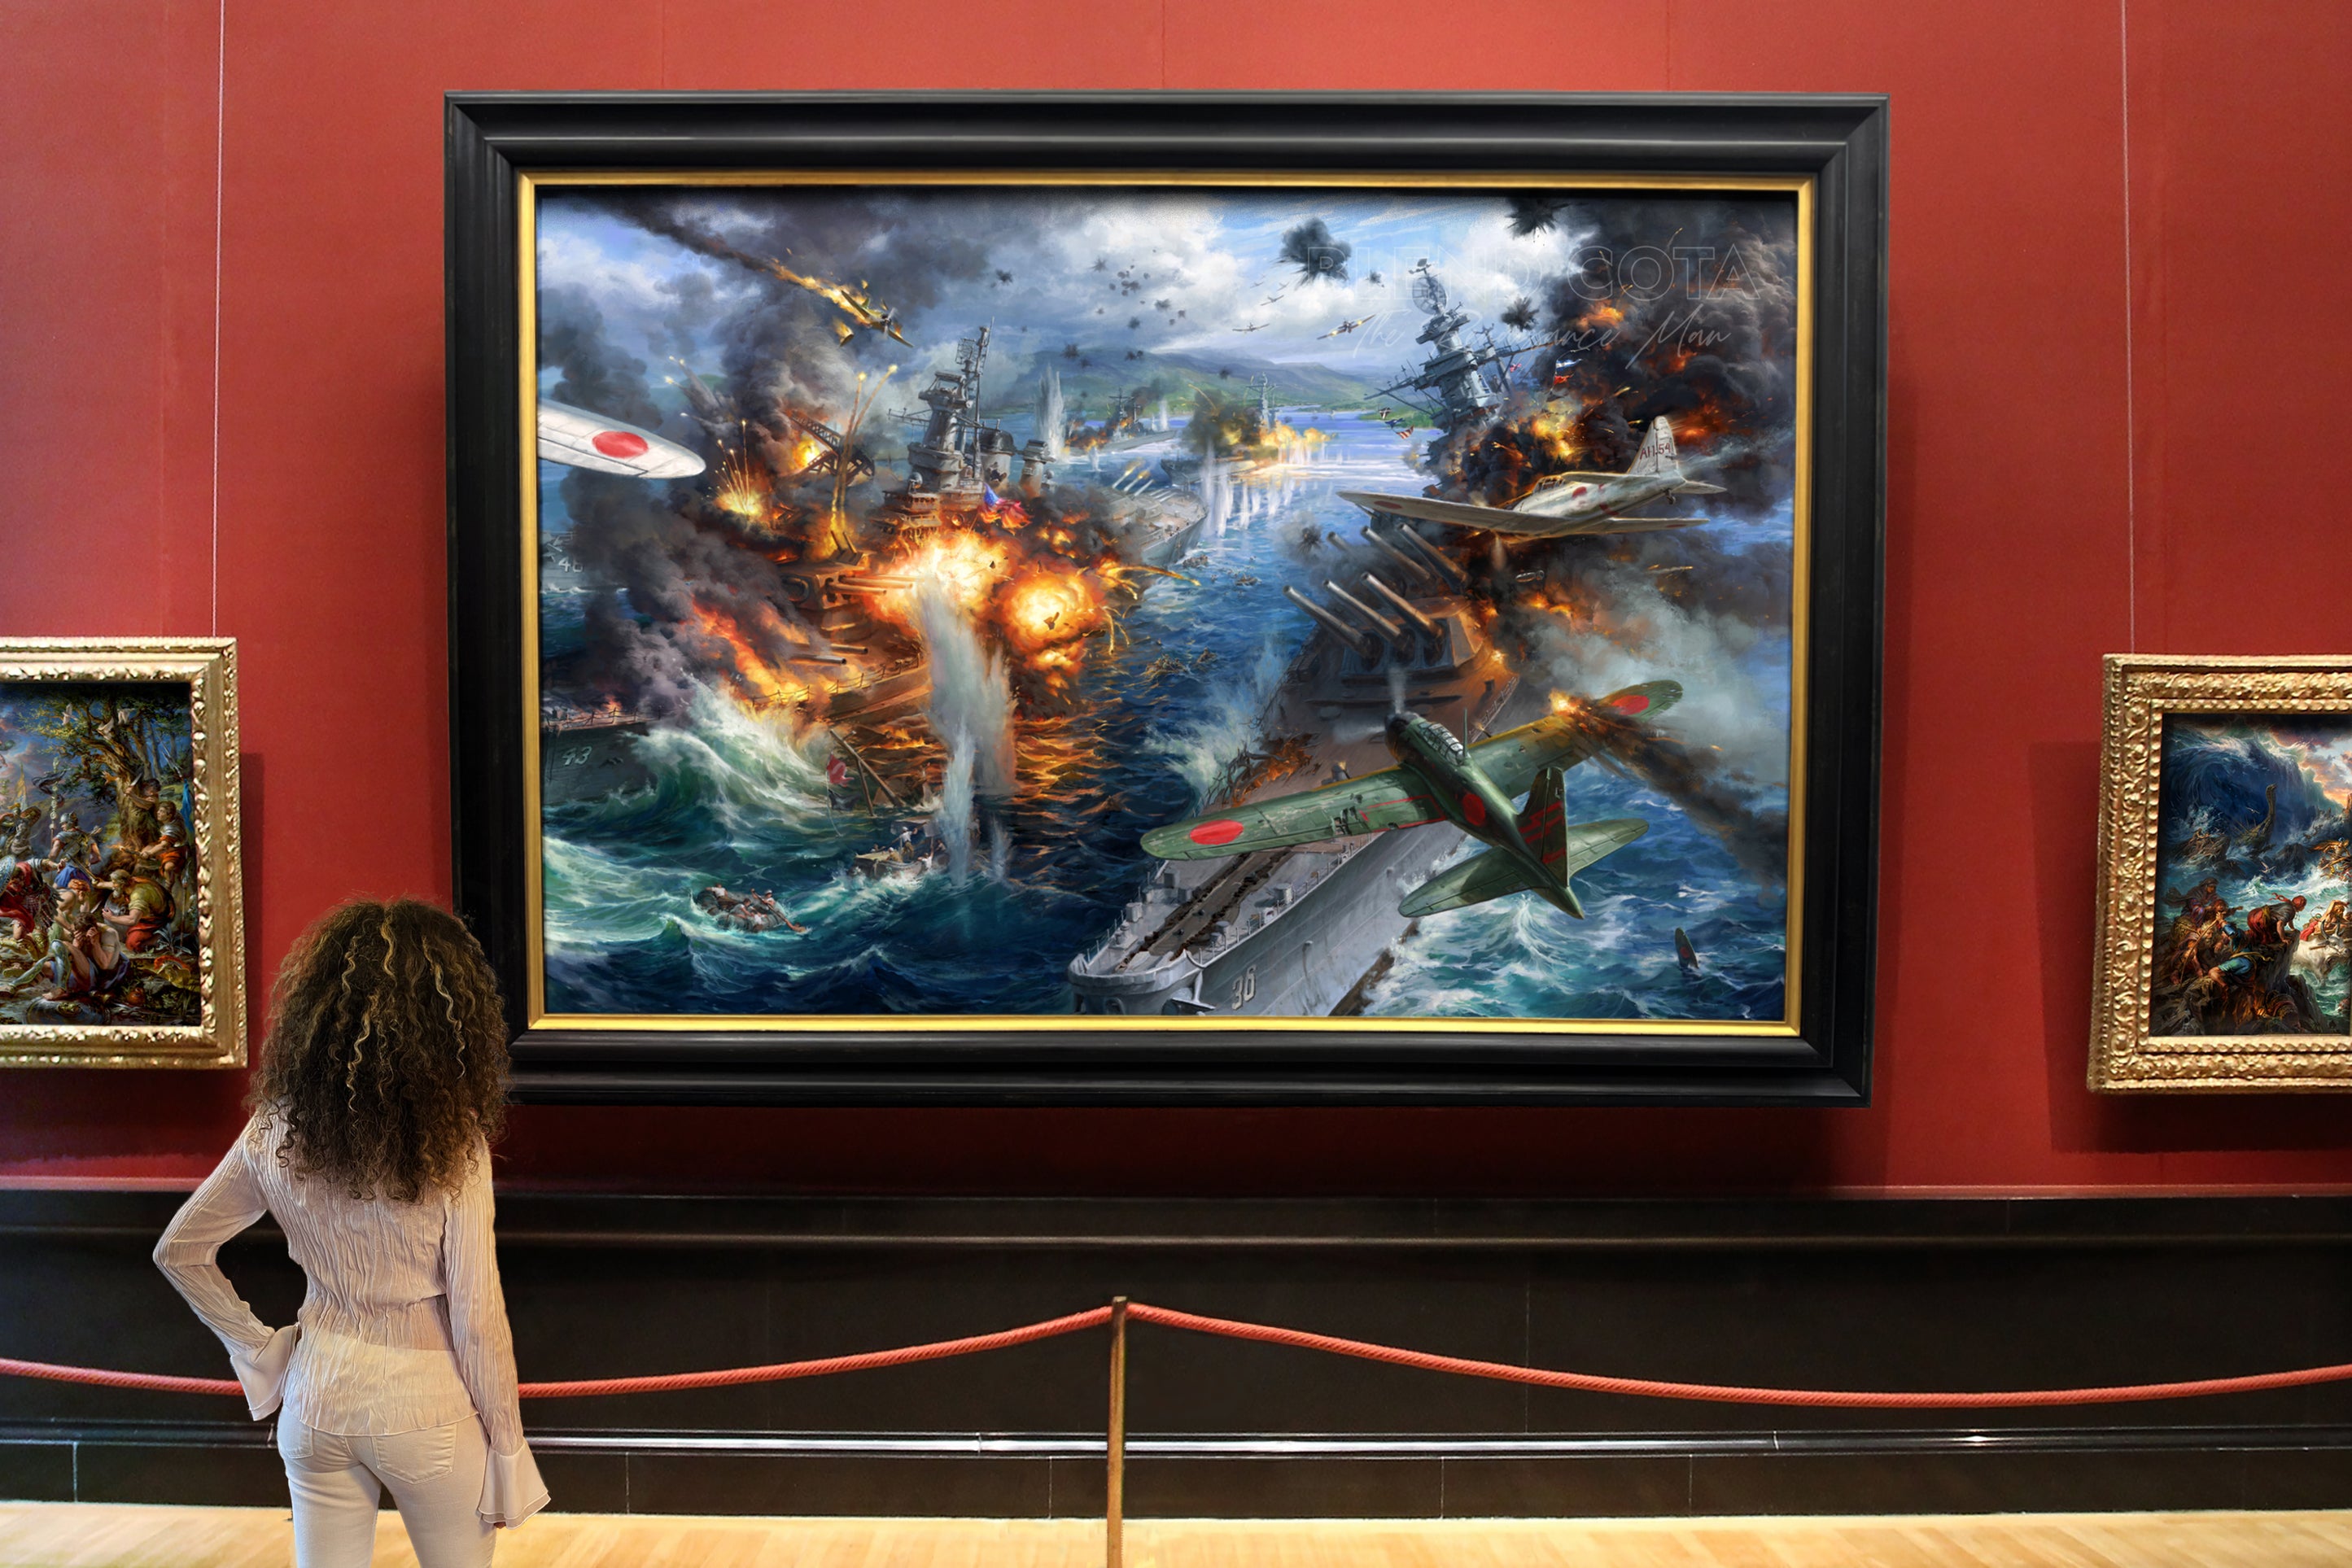 art gallery museum showing of Limited edition painting on canvas of the attack on Pearl Harbor, Japanese planes bombing American battleships, on a background of destruction, smoke and fire, realism style with detailed brushstrokes.